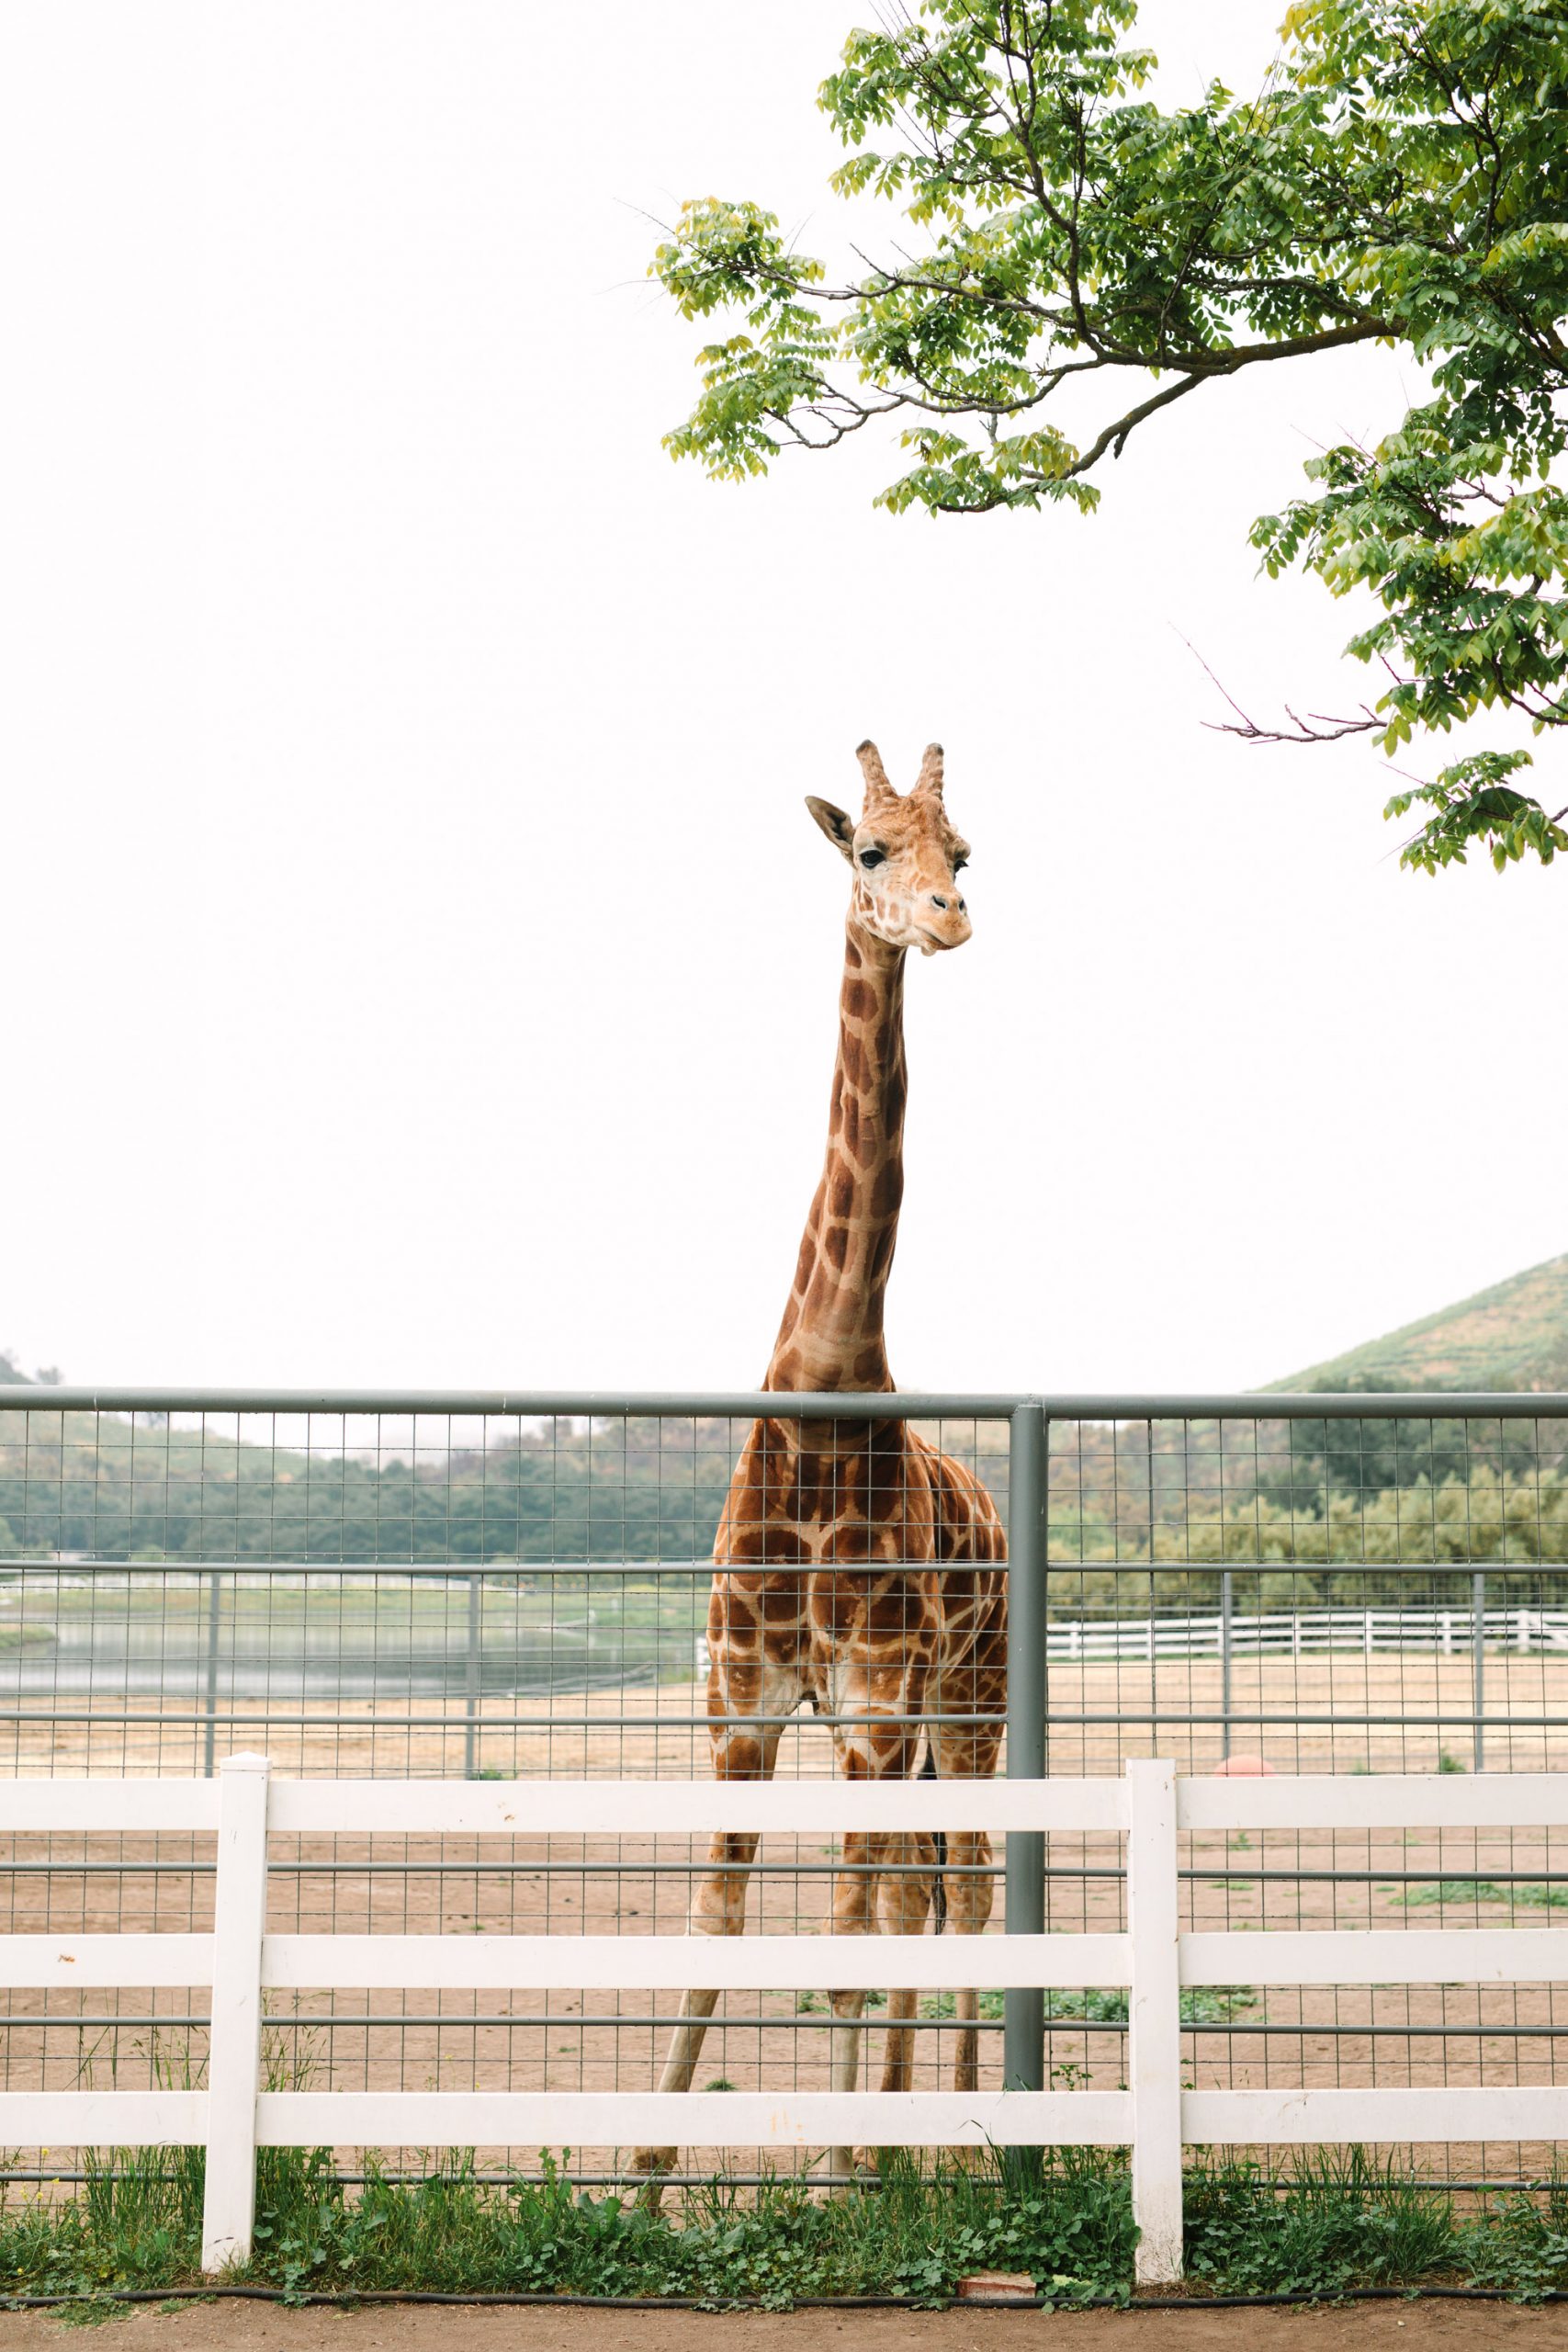 Stanley the giraffe by Mary Costa Photography